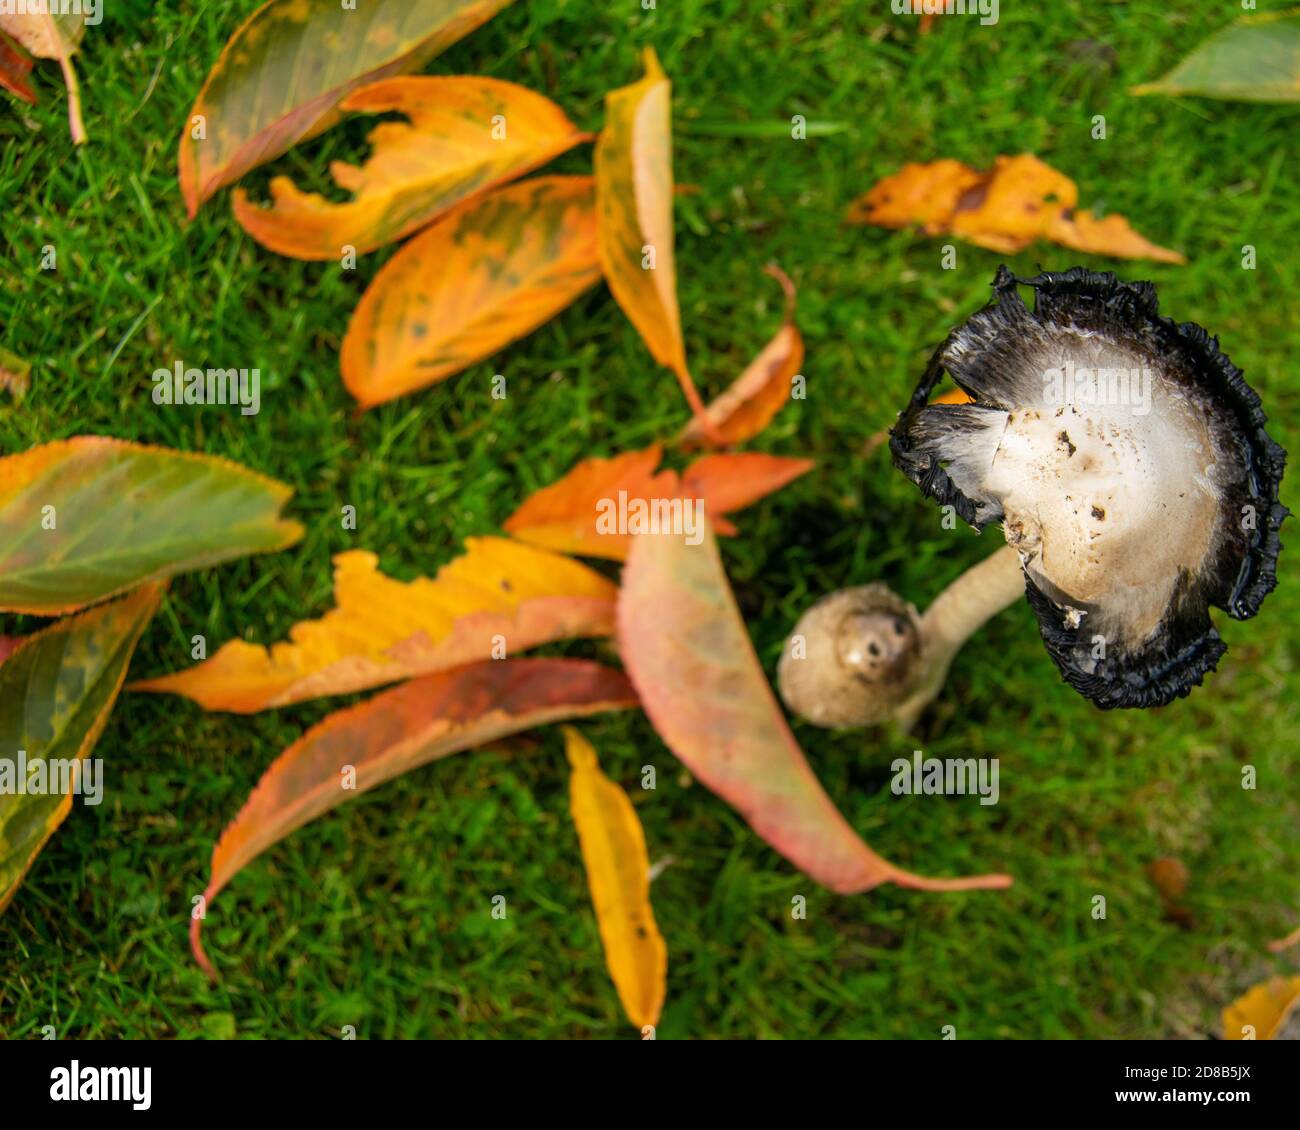 Shaggy ink cap coprinopsis atramentaria view from the top, mushroom surrounded by fallen leafes, moody autumnal picture showing two muchrooms together Stock Photo